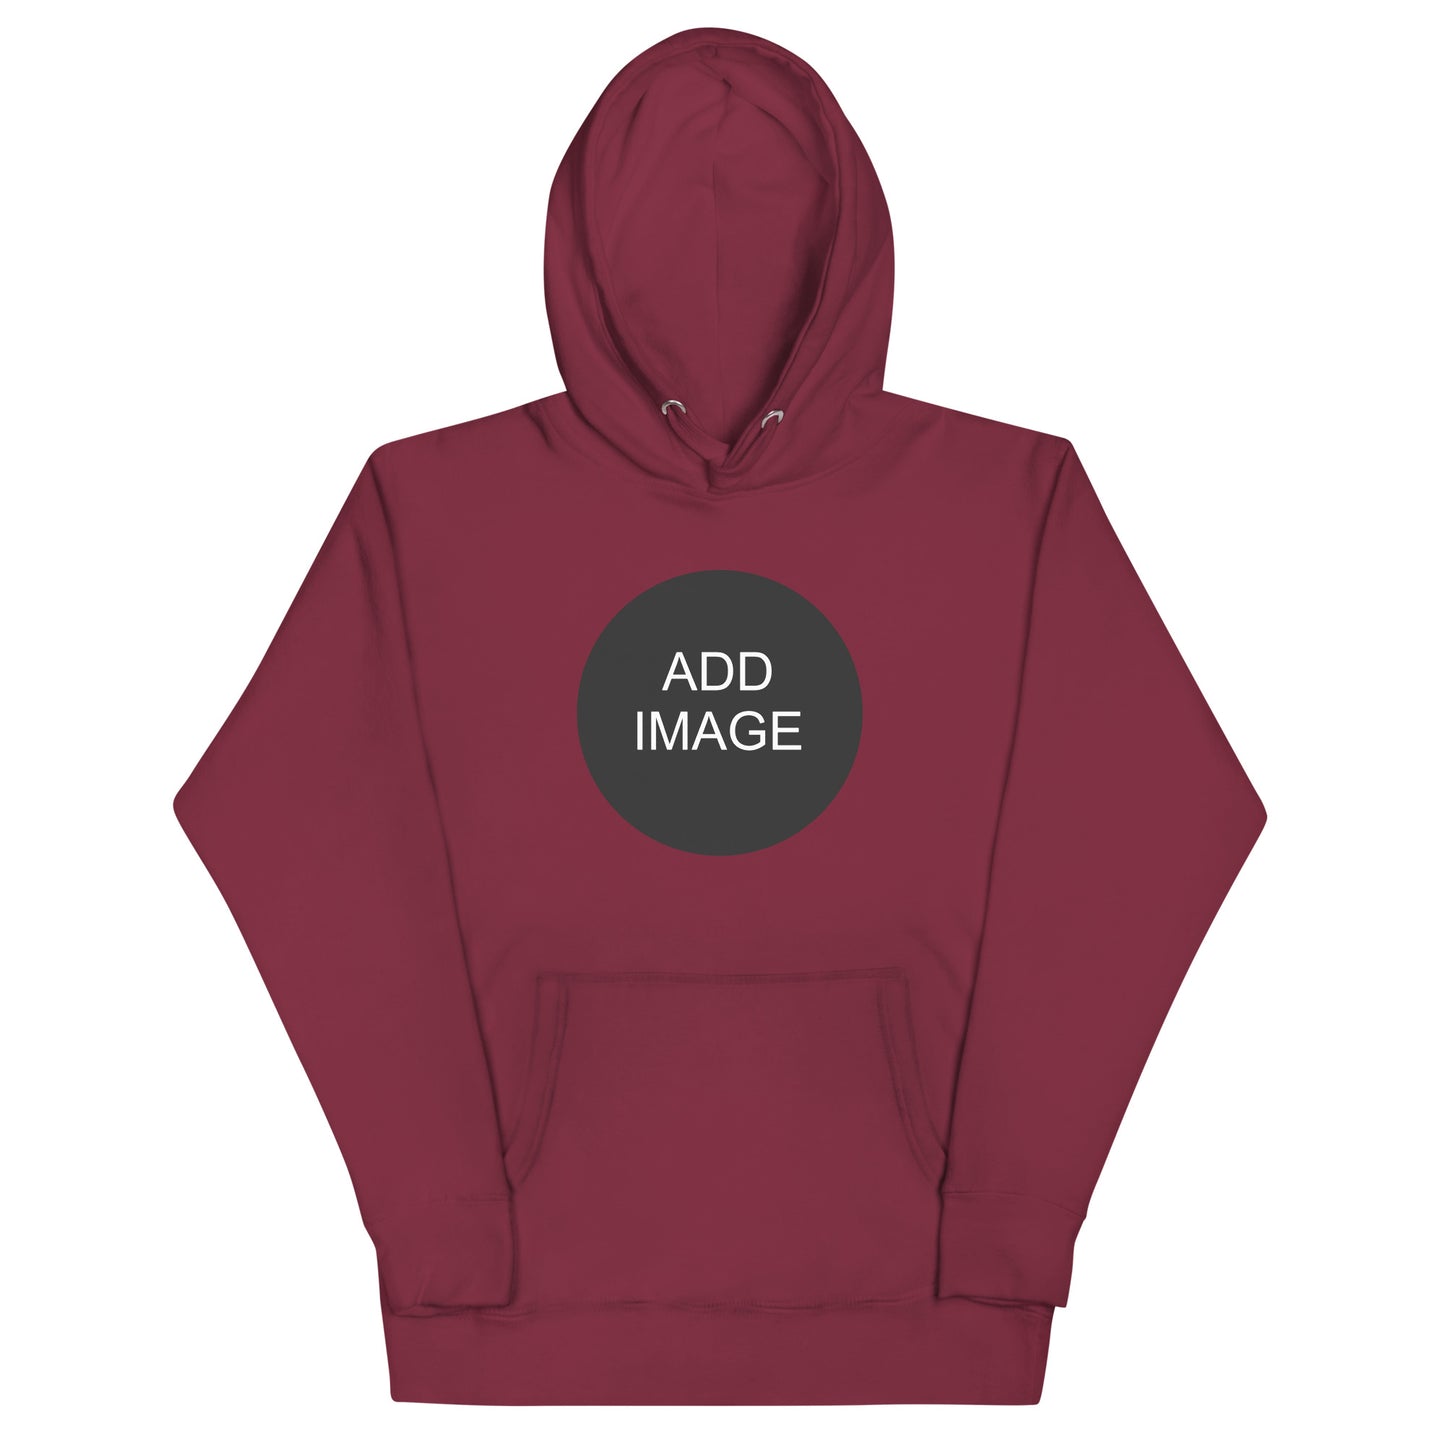 Customizable Hoodie - Front Image Only - Unisex